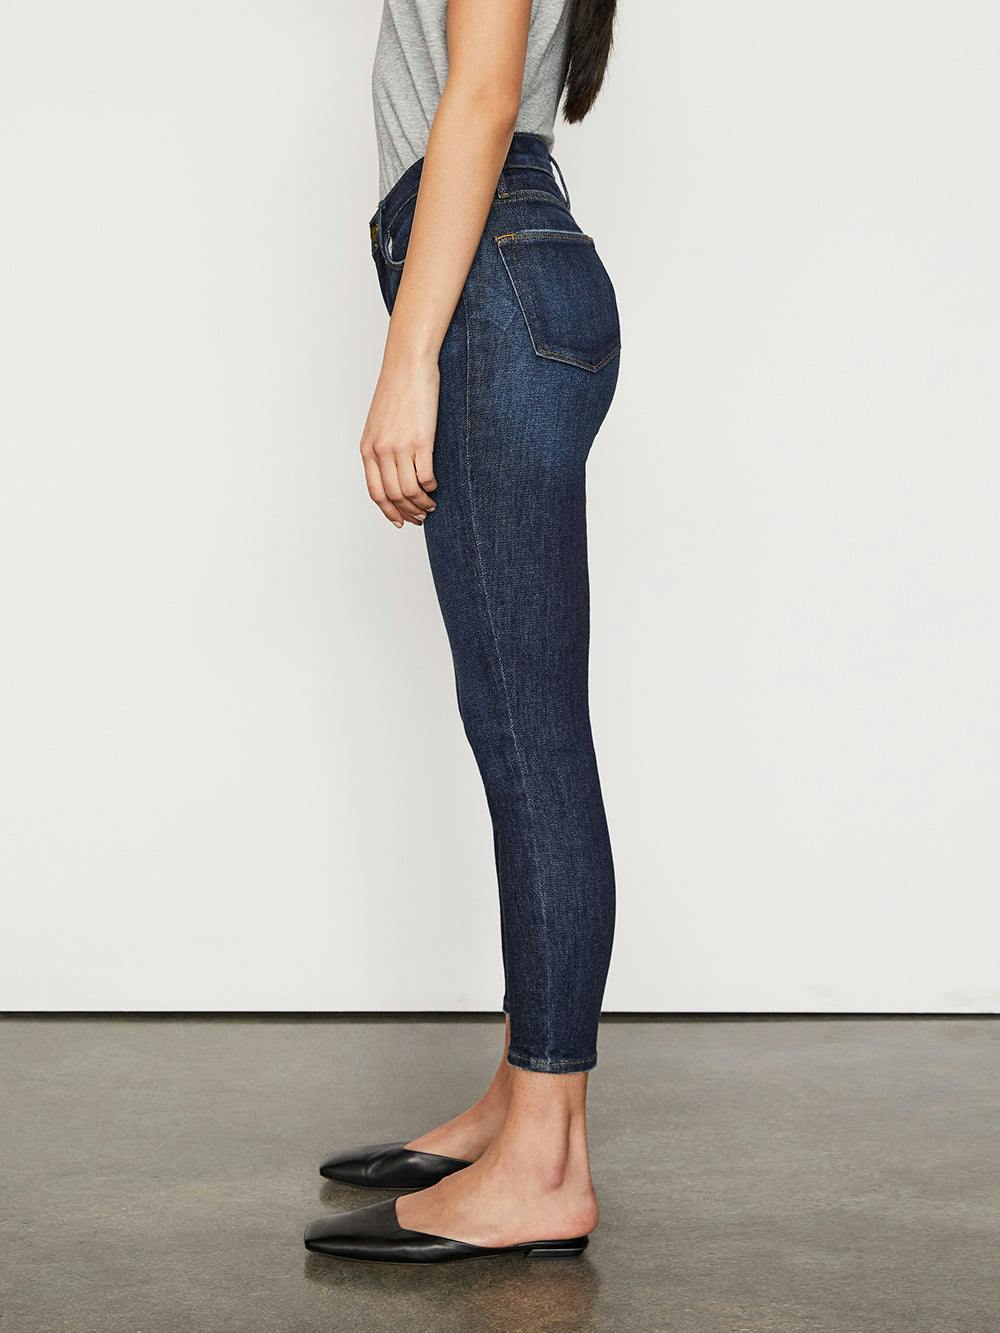 jeans side view 